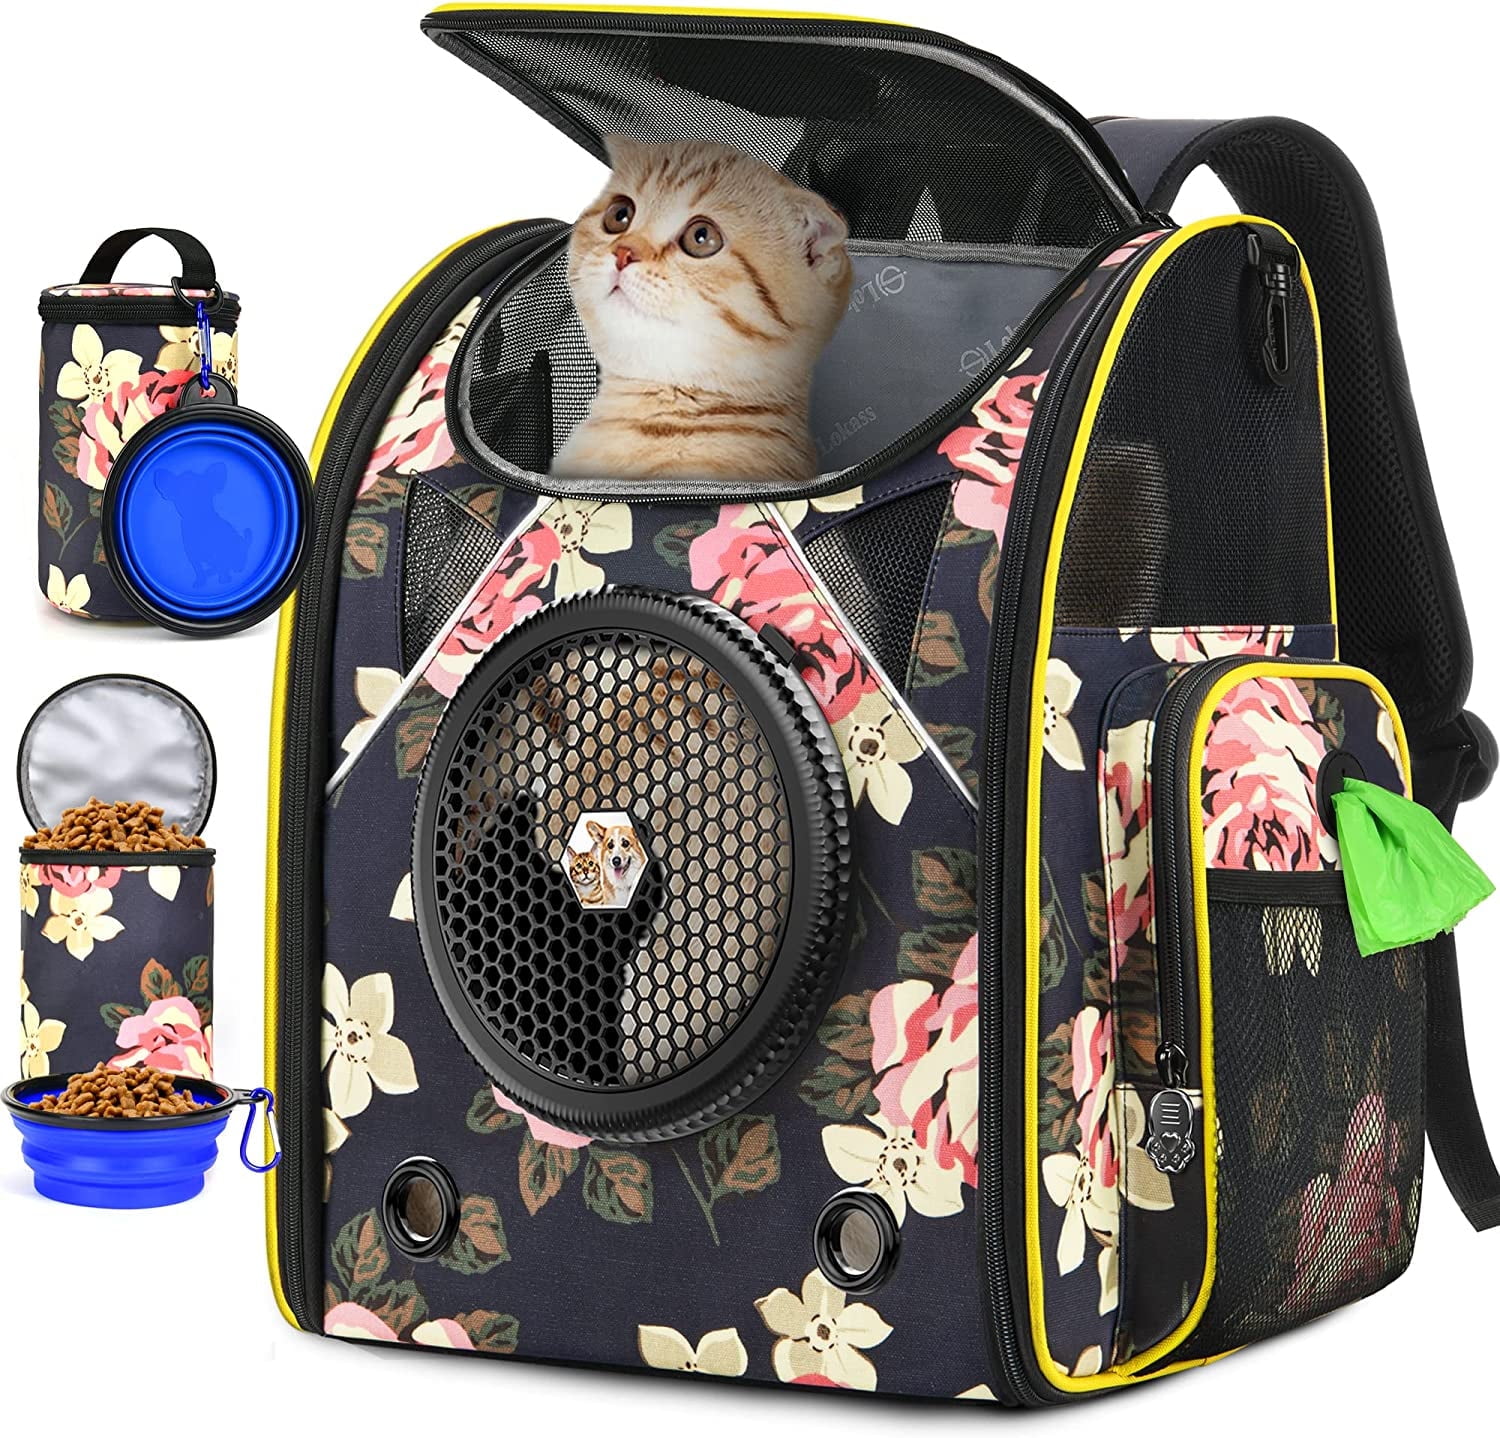 BAGLHER Pet Travel Carrier, Cat Carriers Dog Carrier for Small